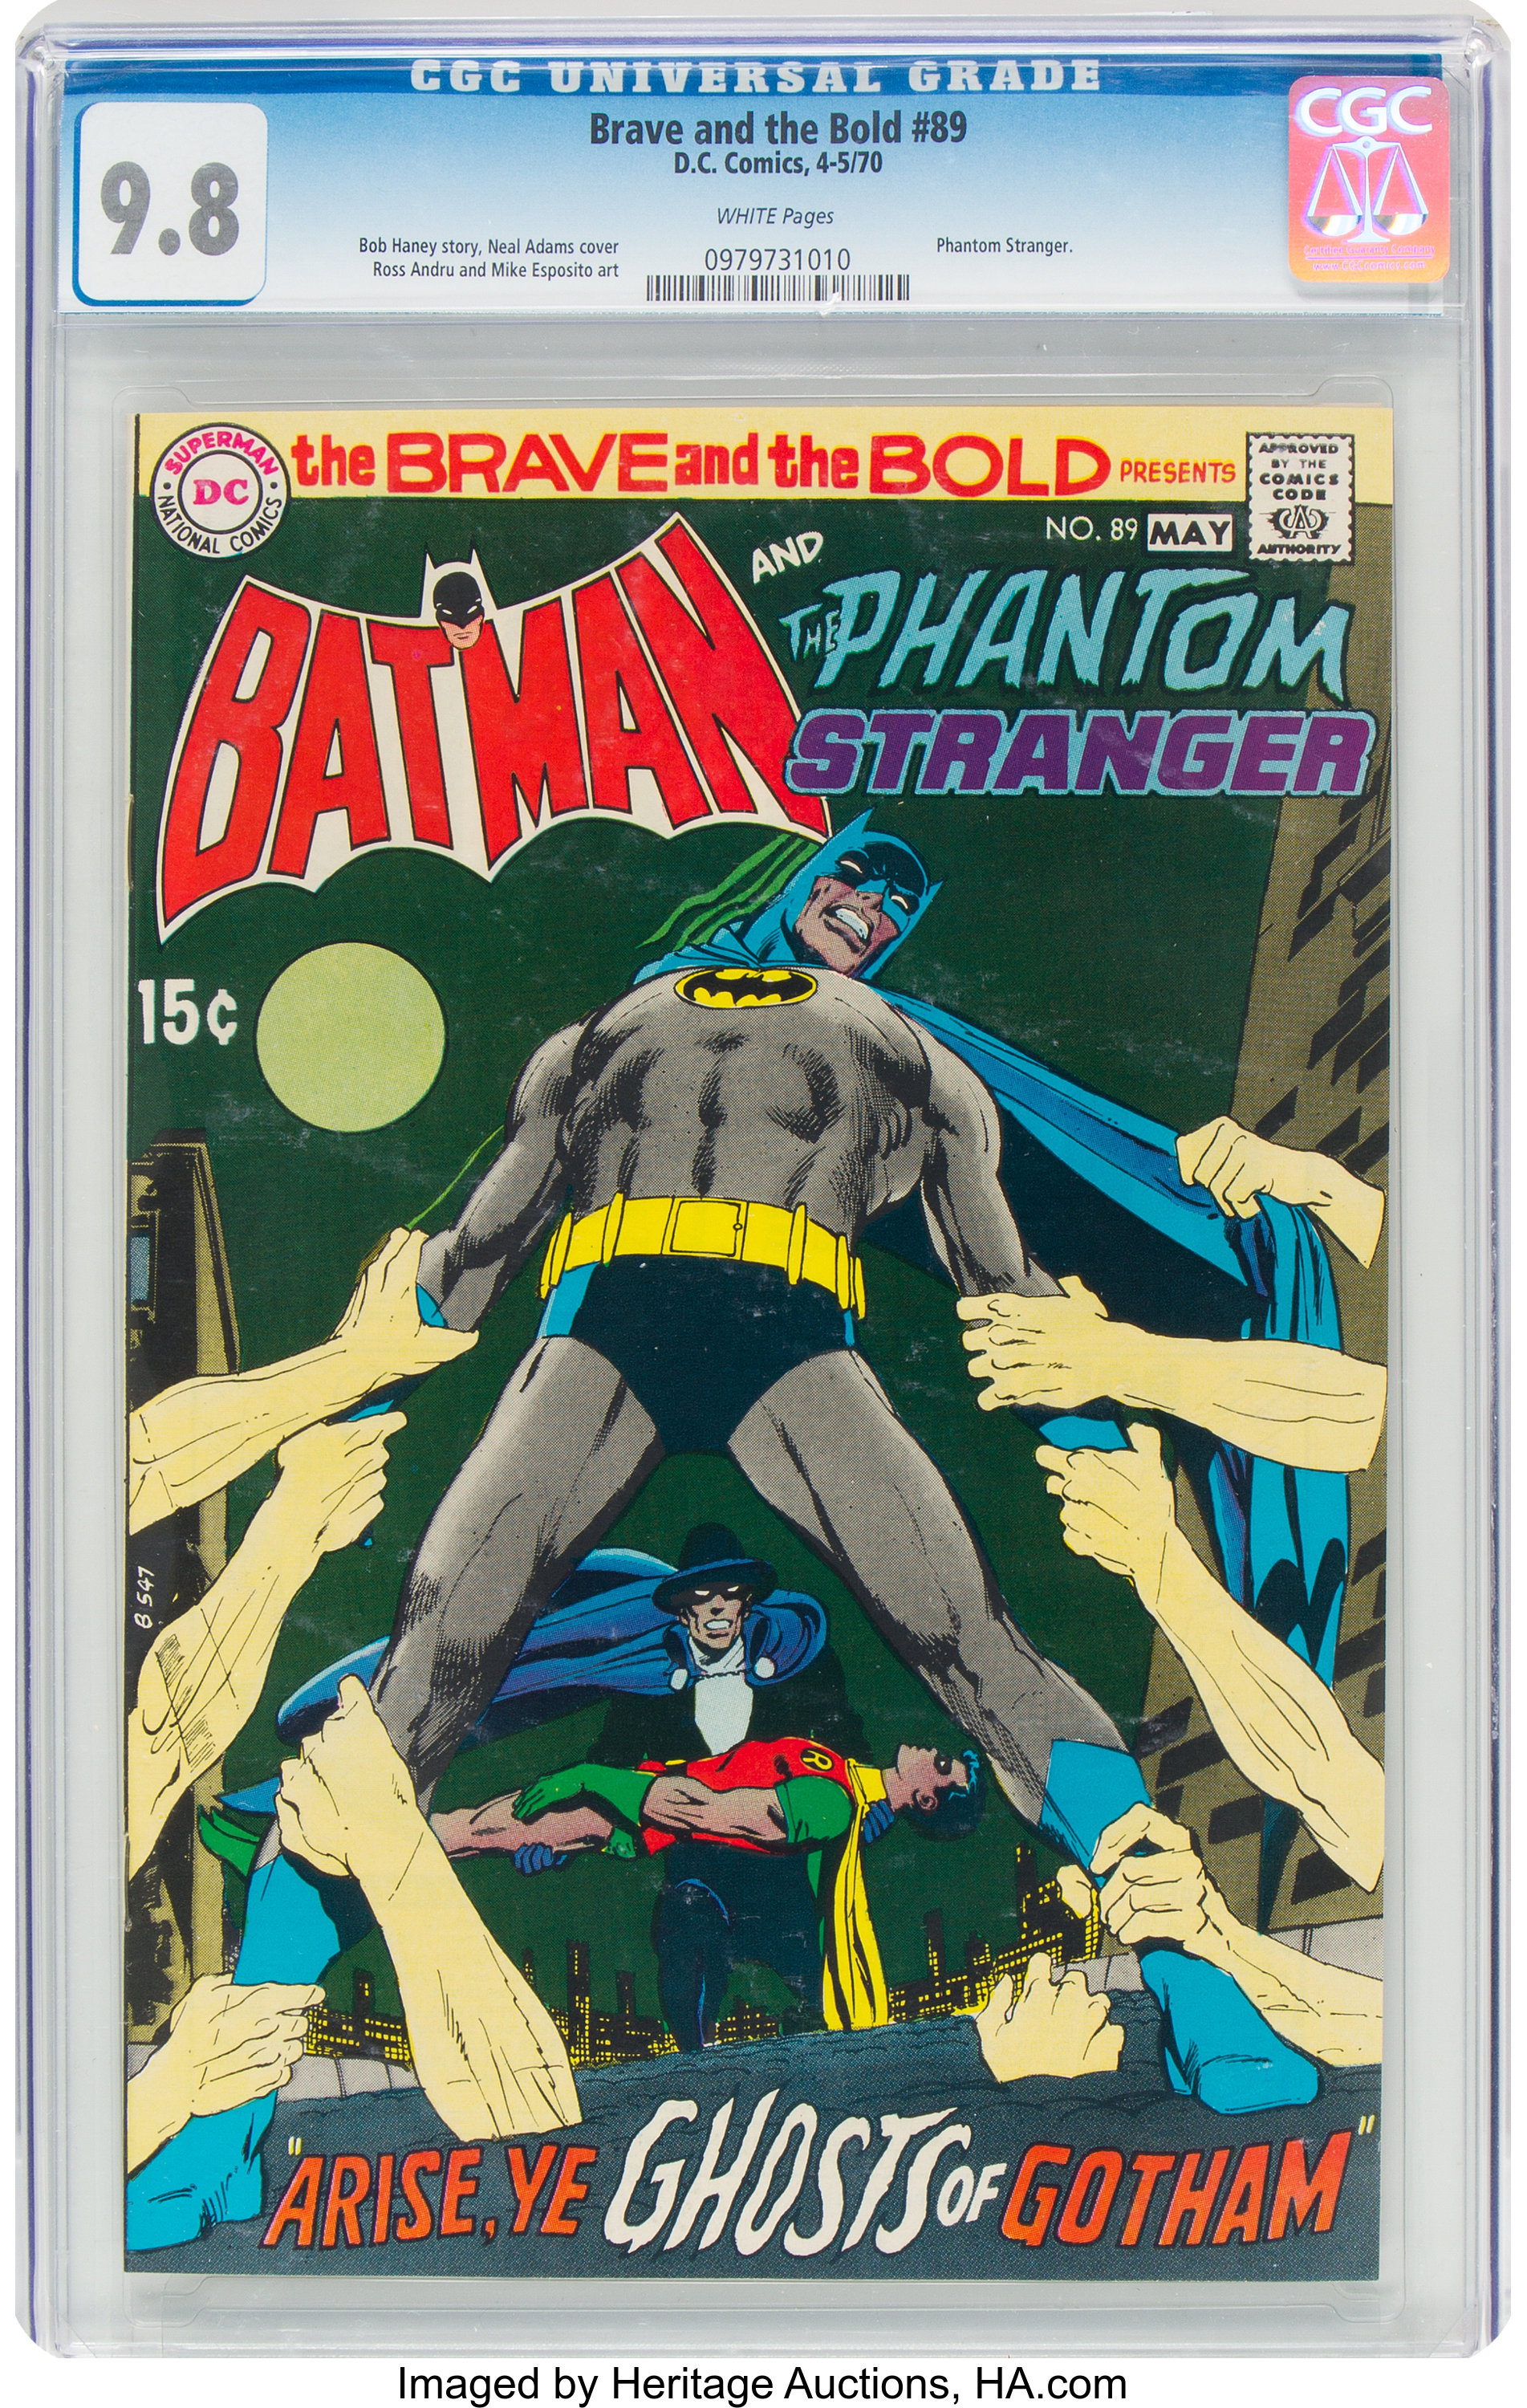 The Brave and the Bold #89 Batman and the Phantom Stranger (DC, | Lot  #96408 | Heritage Auctions